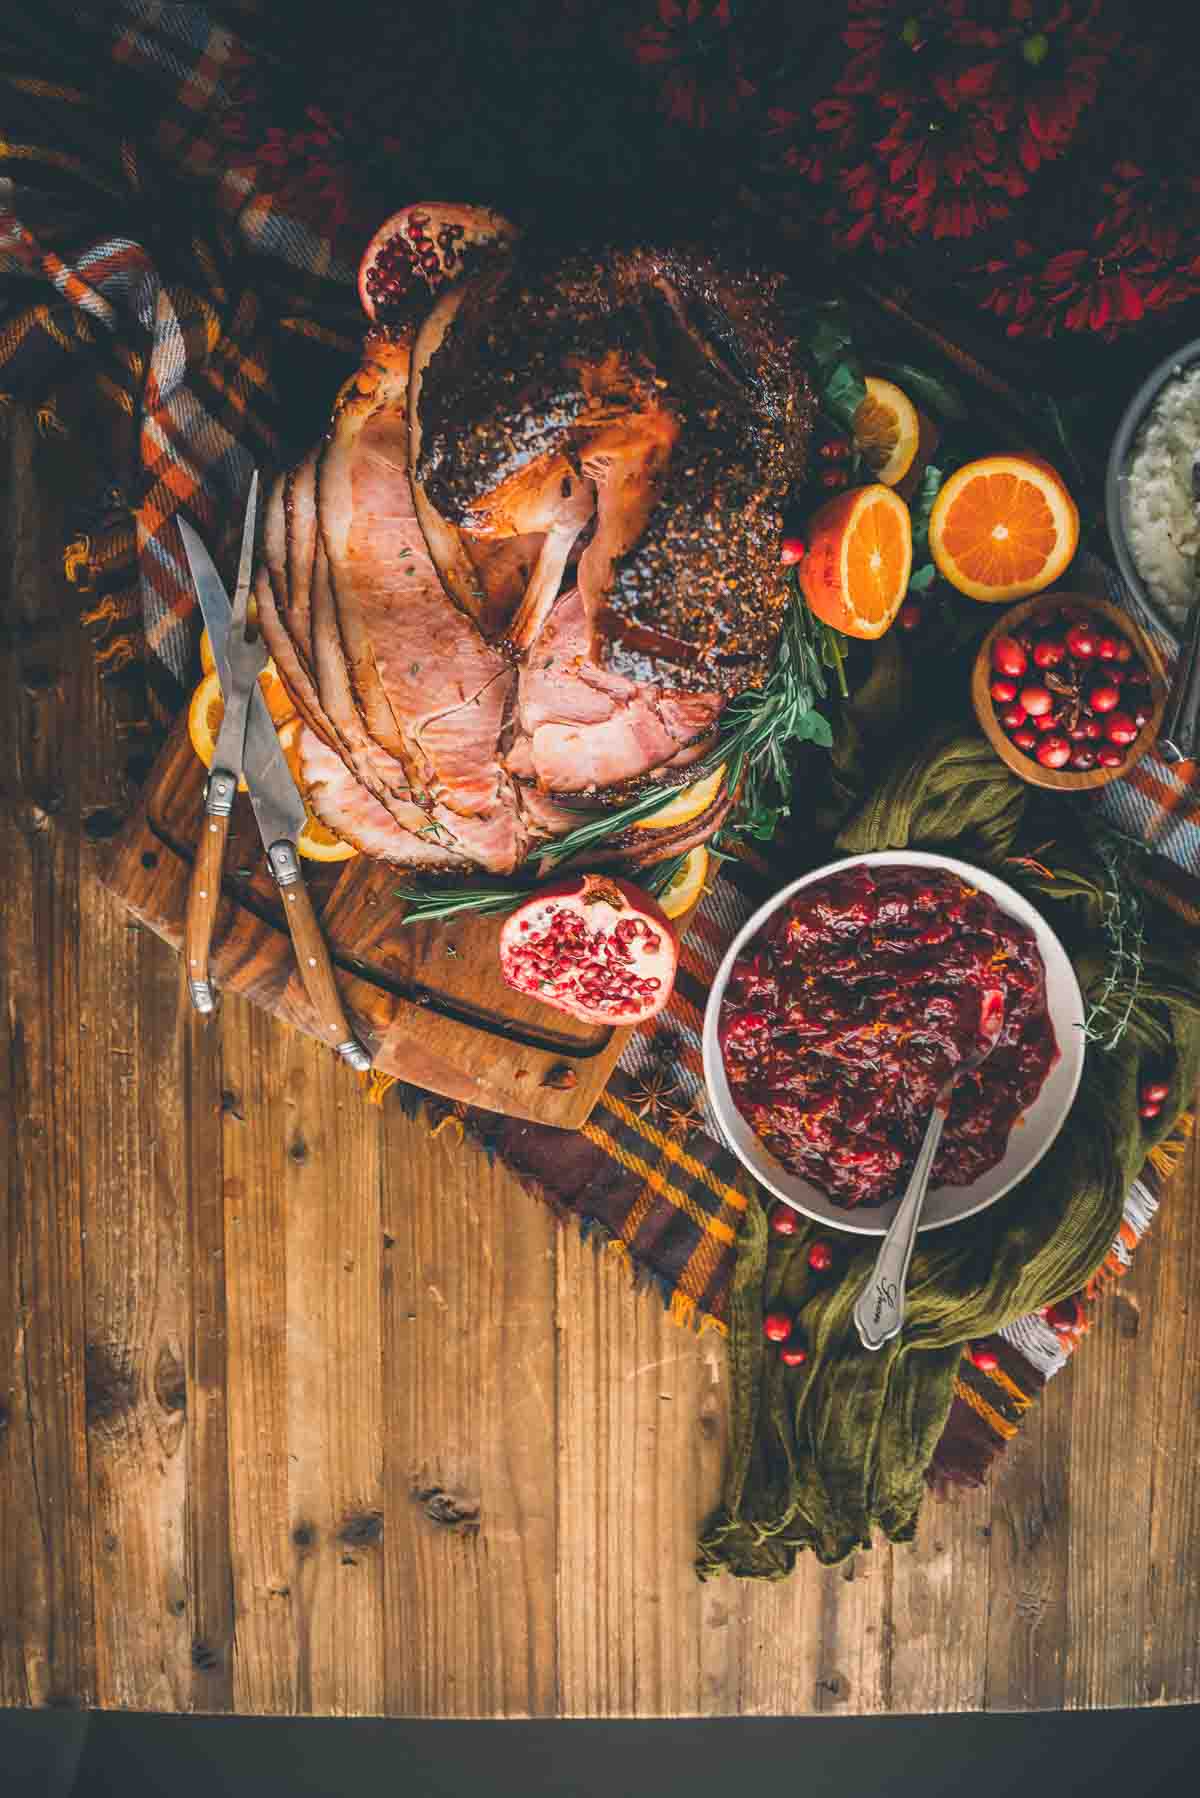 Overhead shot of holiday dinner table with sliced smoked ham and cranberry sauce, garnished with oranges, herbs and pomegranates.  